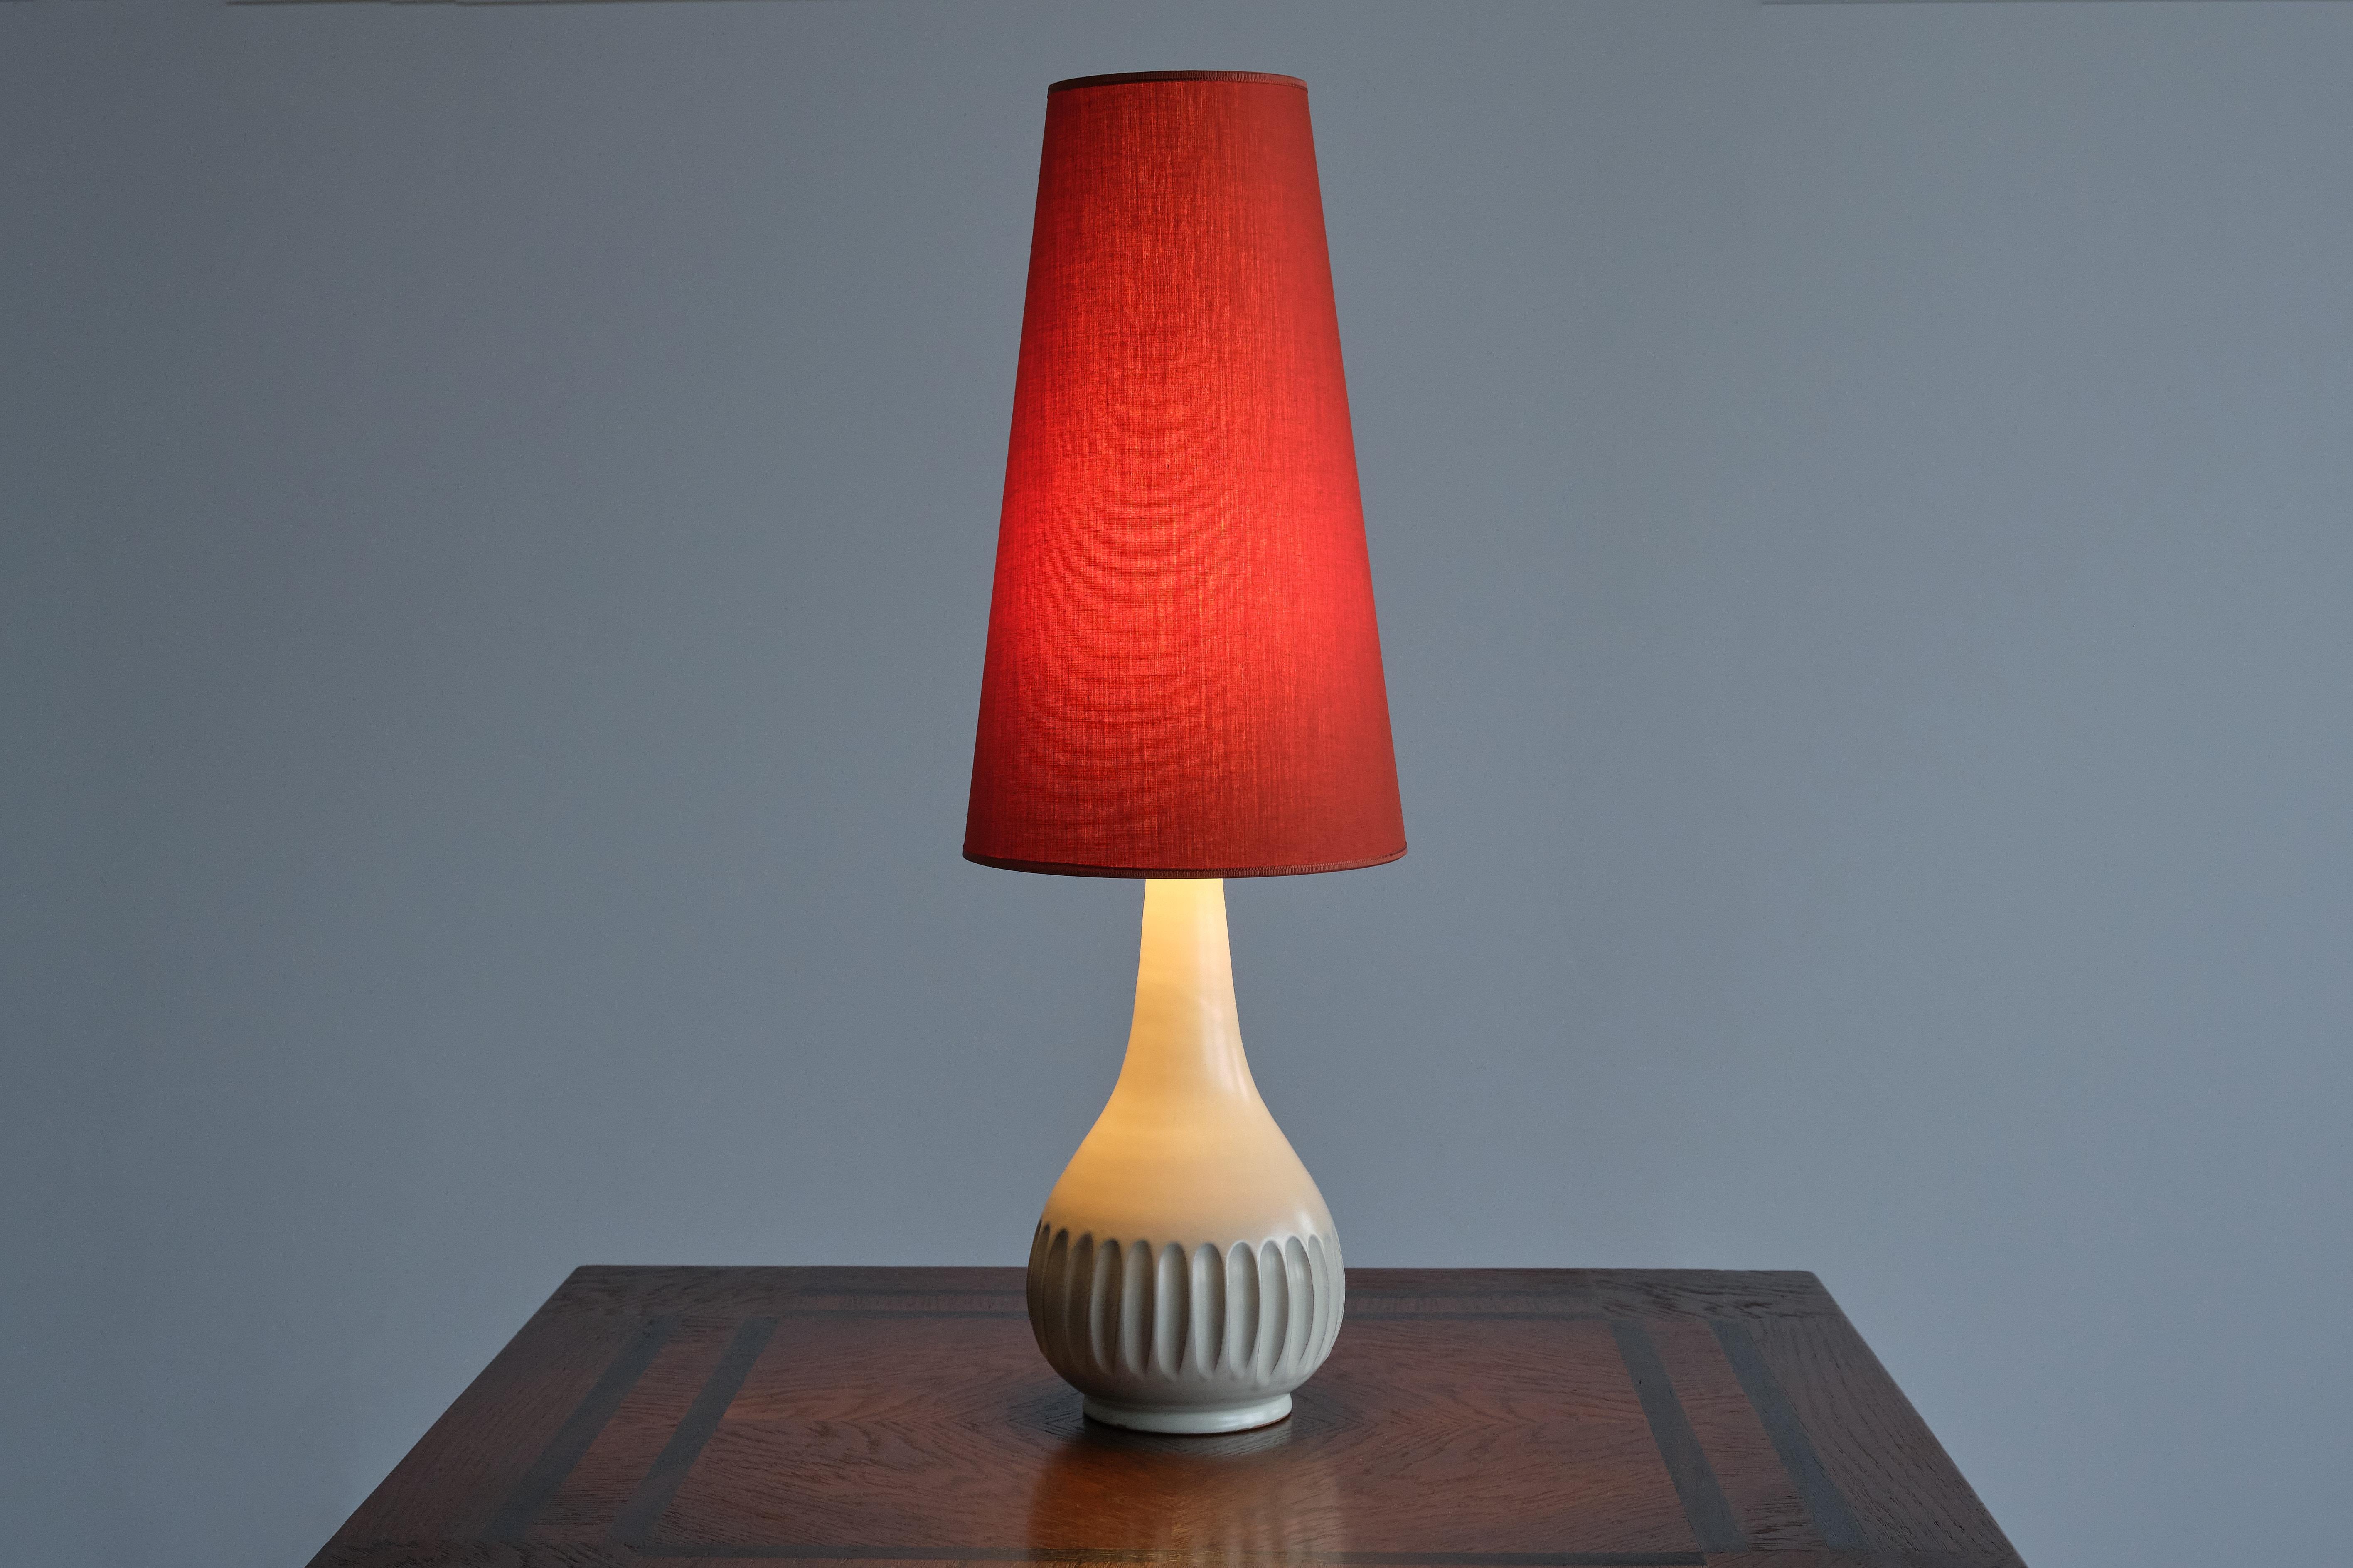 This elegant table lamp was designed by the Swedish painter and ceramicist Anna-Lisa Thomson. The base was produced by the ceramic and porcelain manufacturer Upsala-Ekeby in the late 1940s. The lamp is stamped with 'Ekeby' and the designers initials